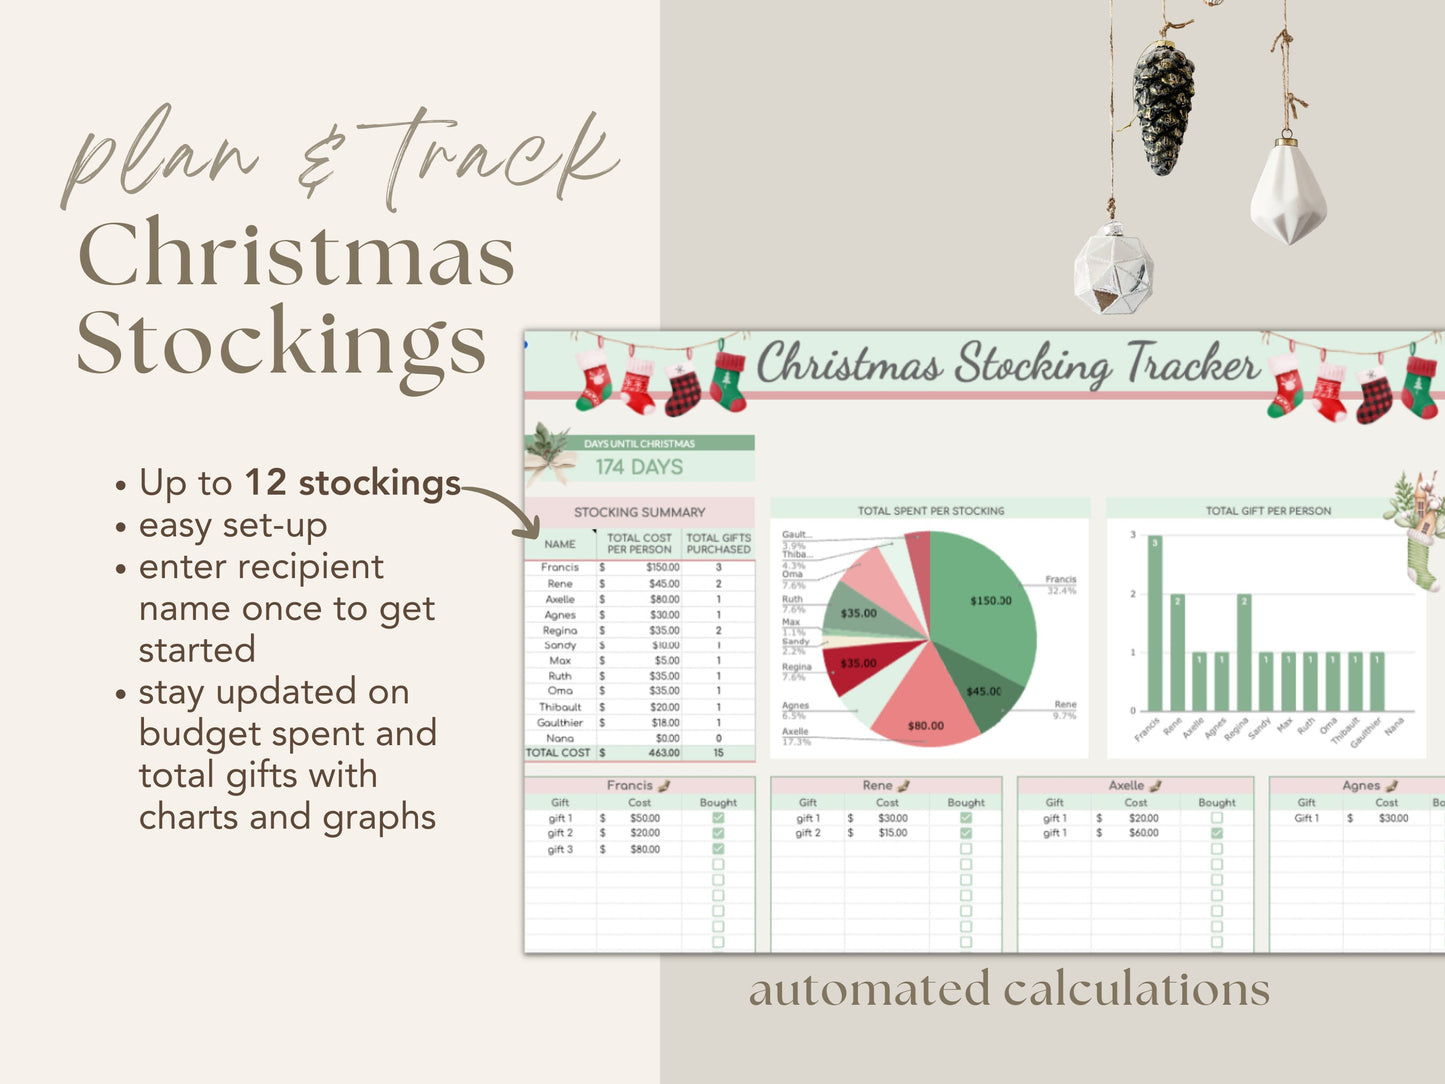 Christmas Planner - Gifts Tracker & Budget